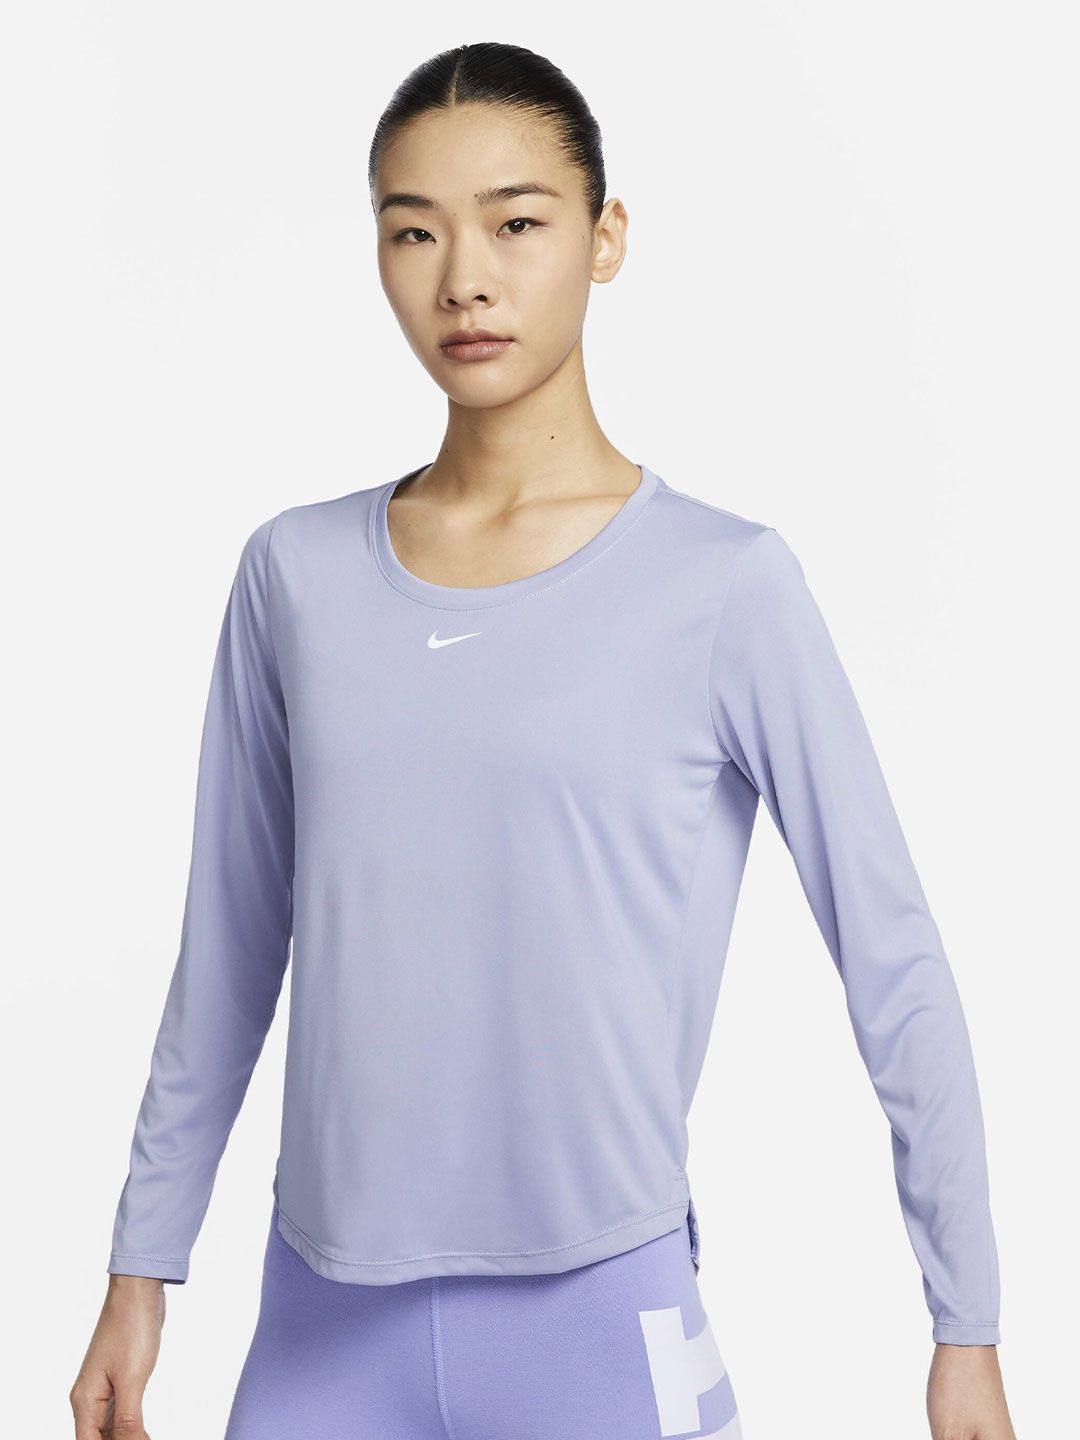 Nike Dri-FIT One Standard Fit Long-Sleeve Top Price in India